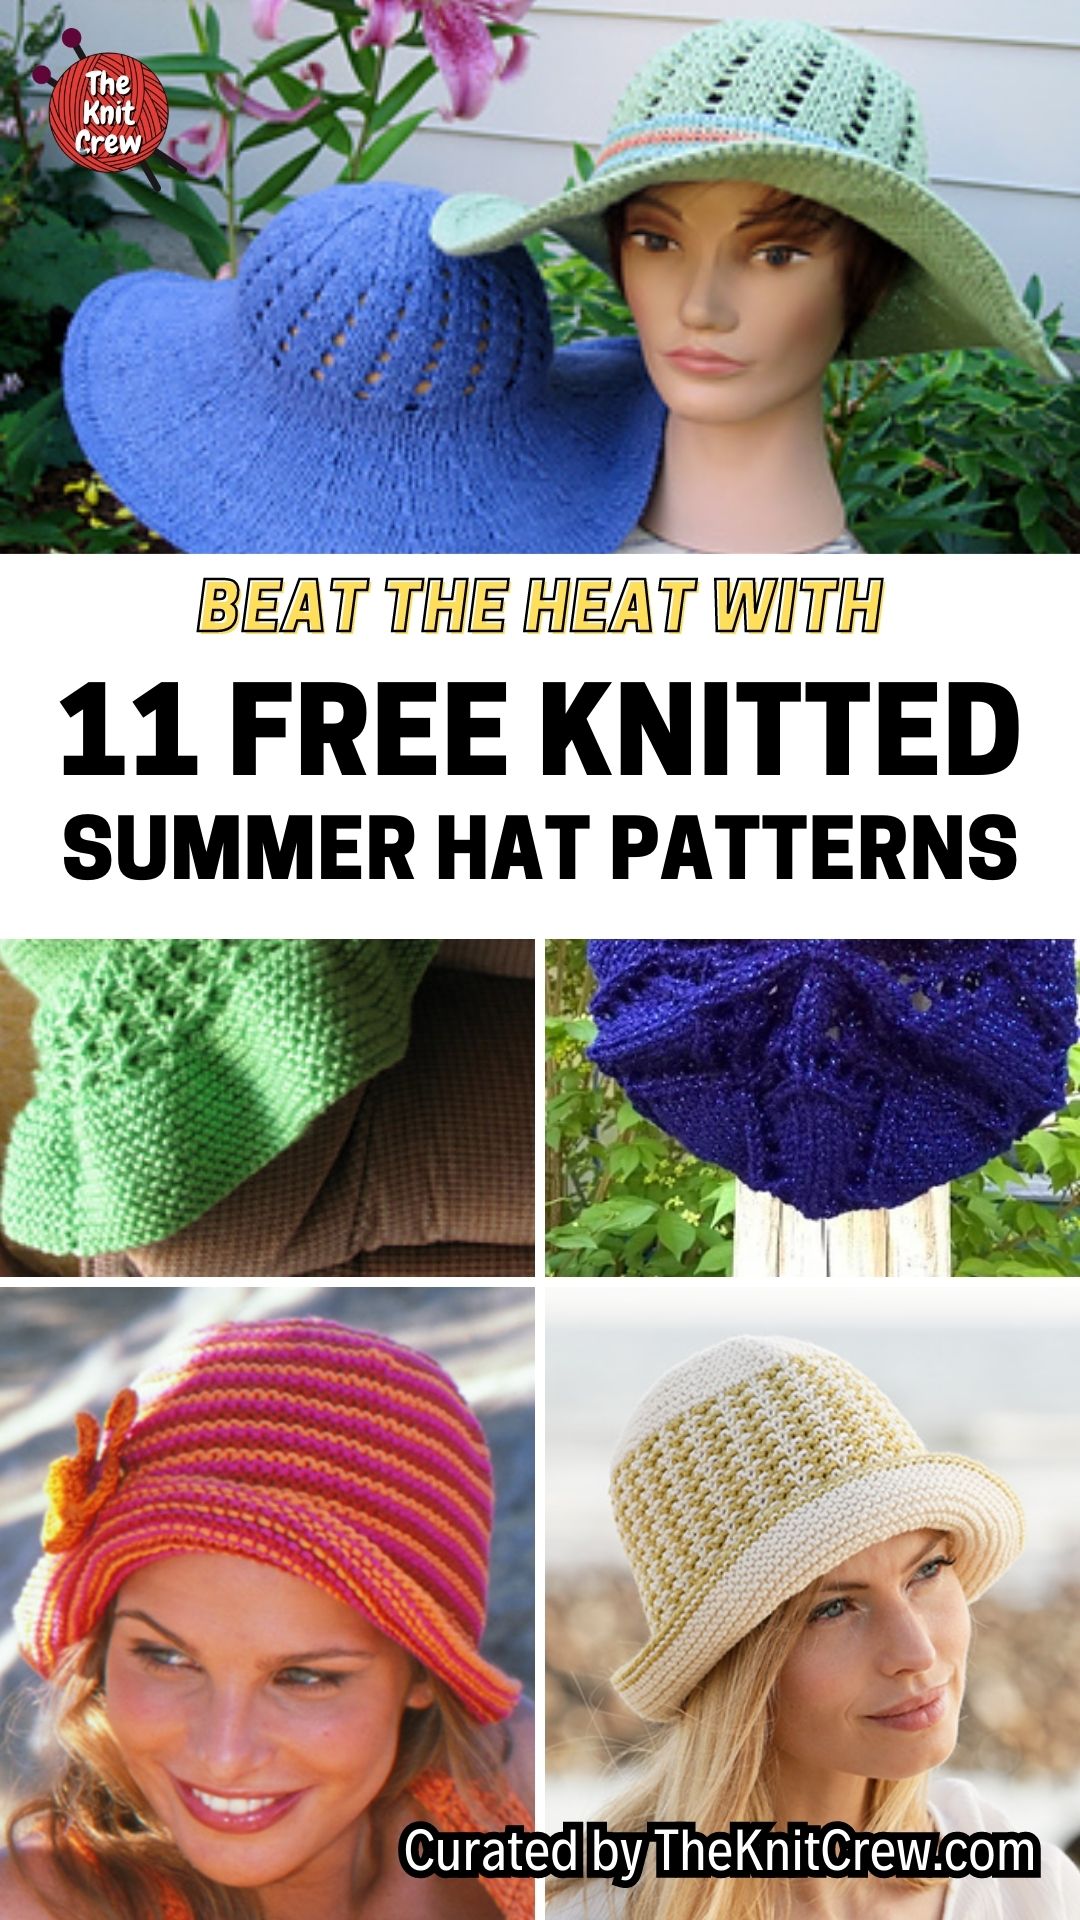 Beat The Heat With 11 Free Knitted Summer Hat Patterns - The Knit Crew